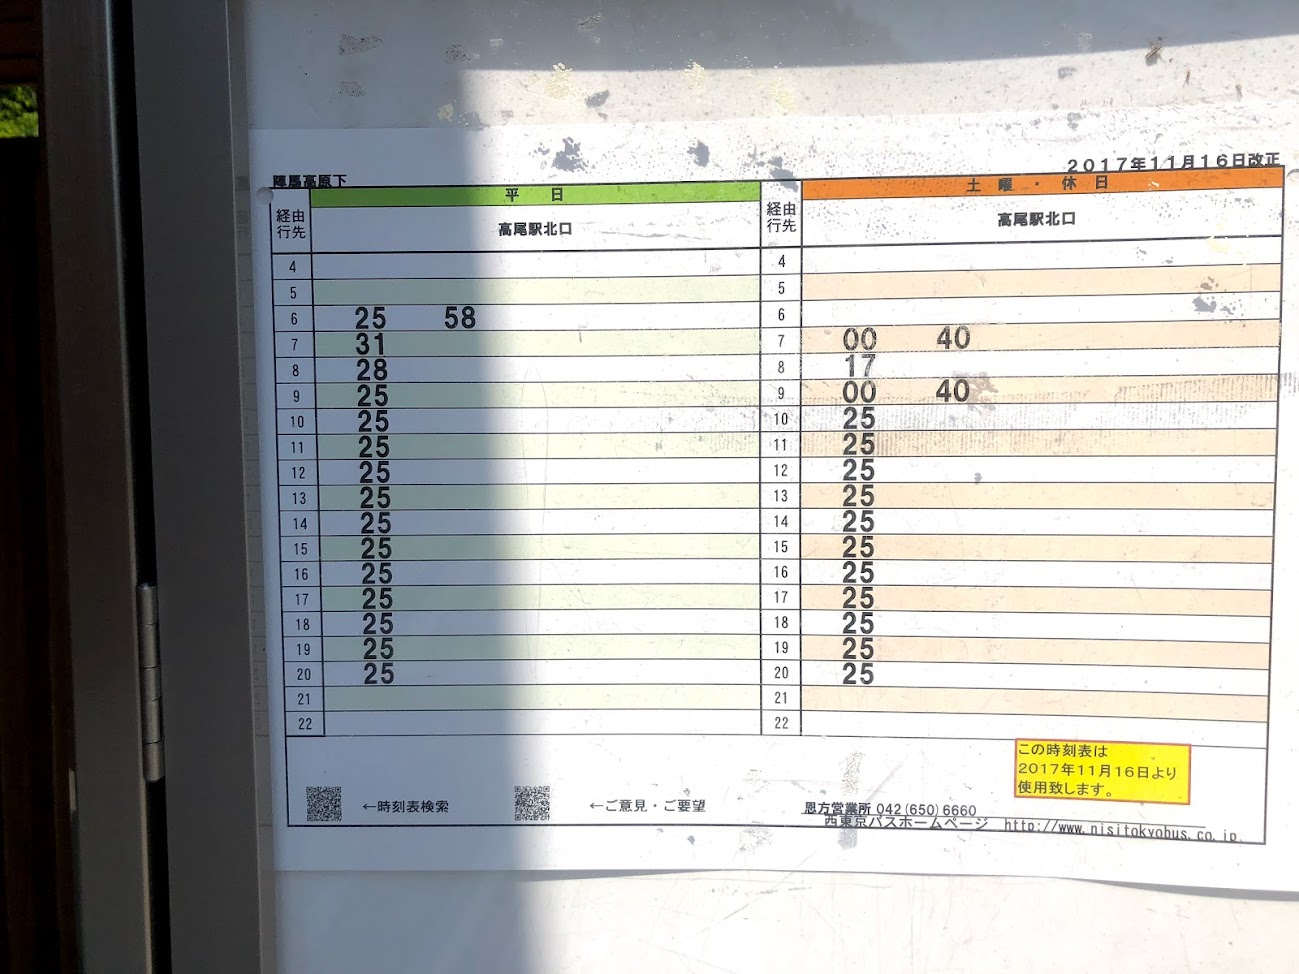 time table of bus stop